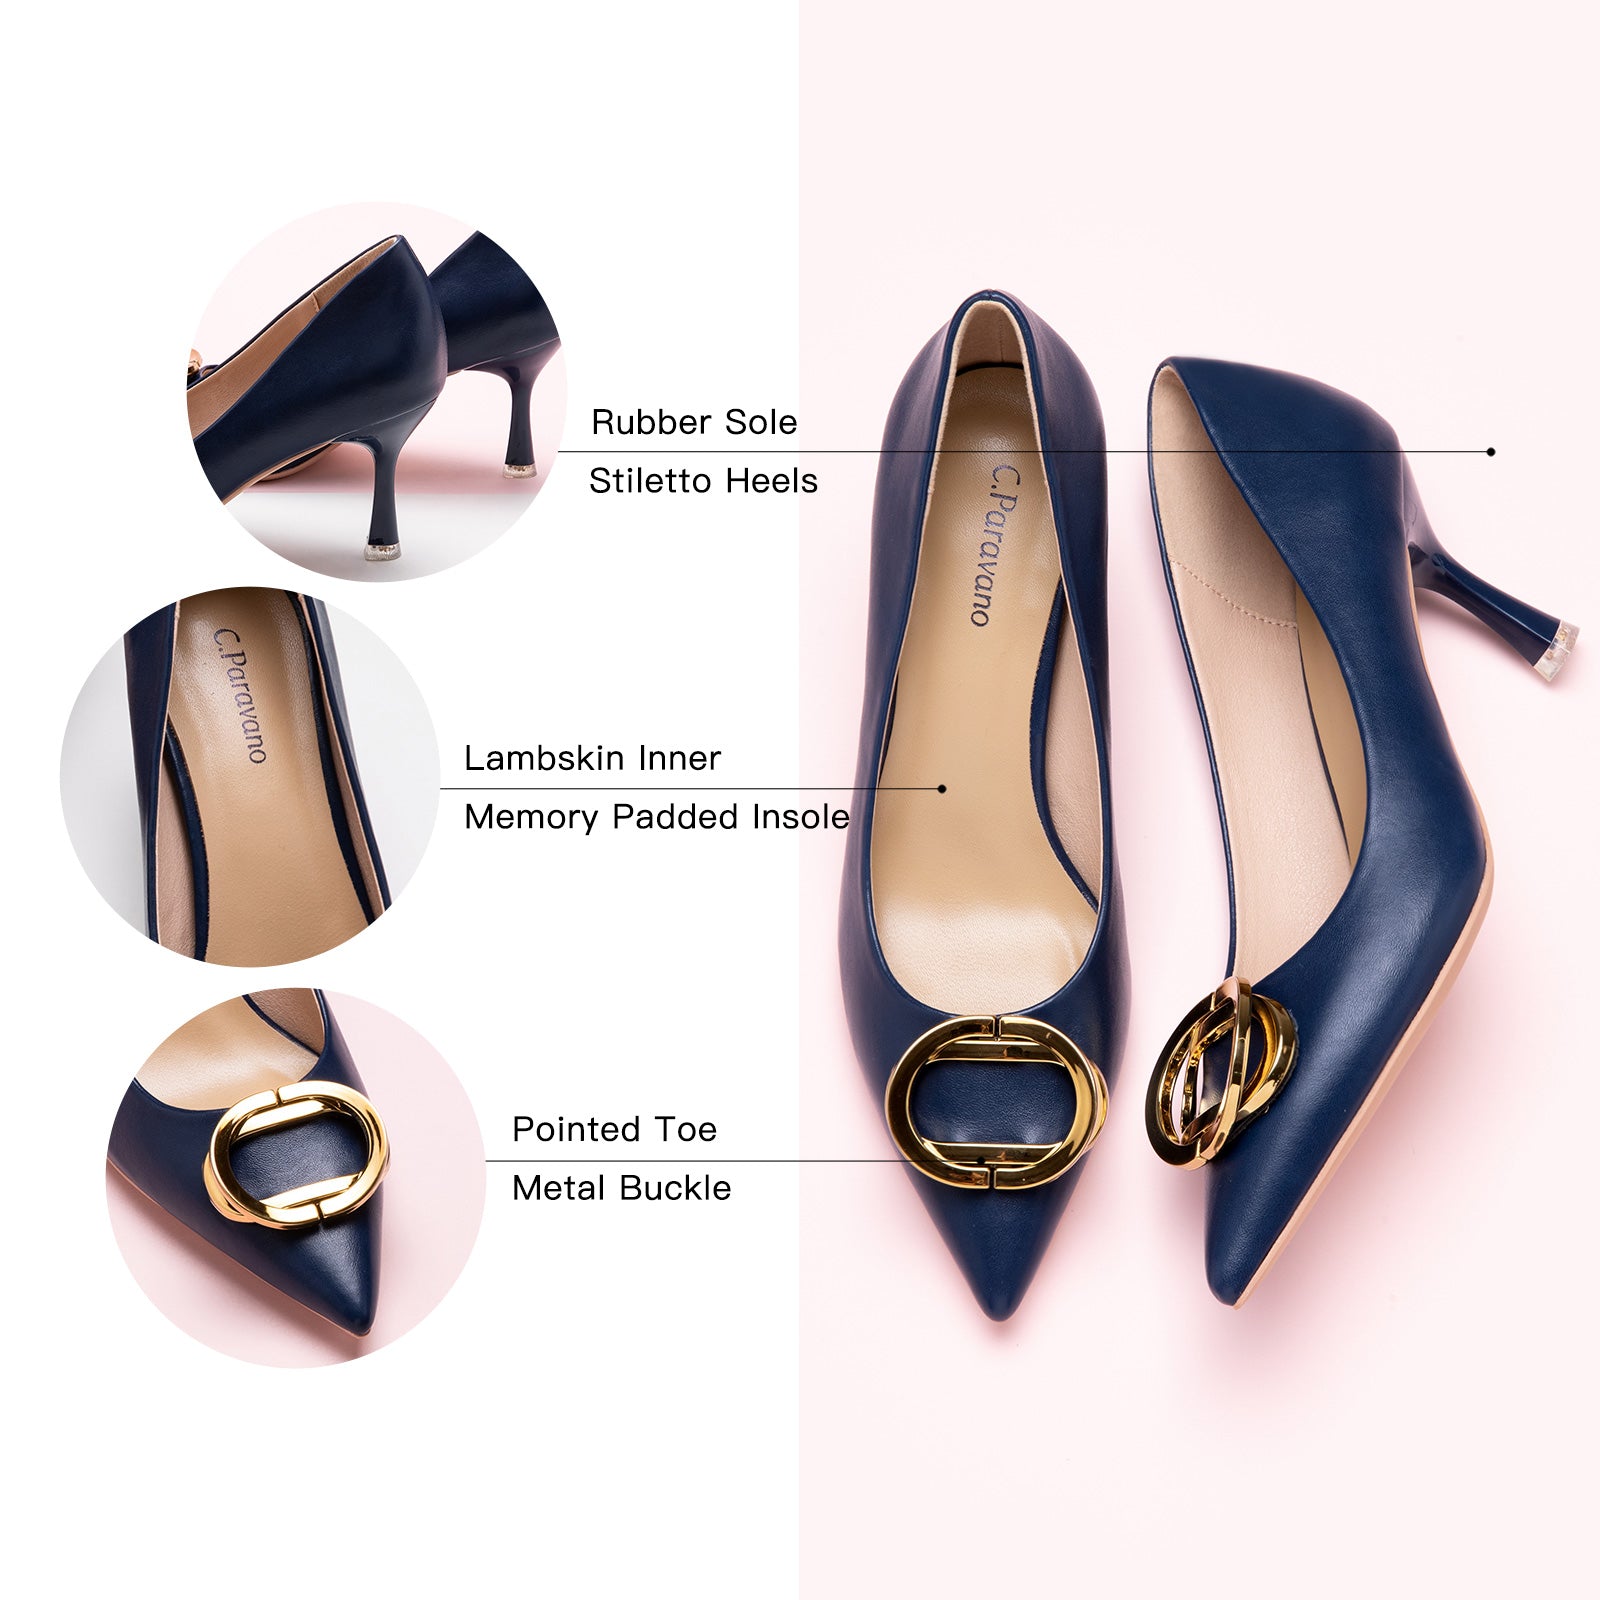  Navy Women Pumps featuring metal buckles, a refined and versatile addition to your footwear collection